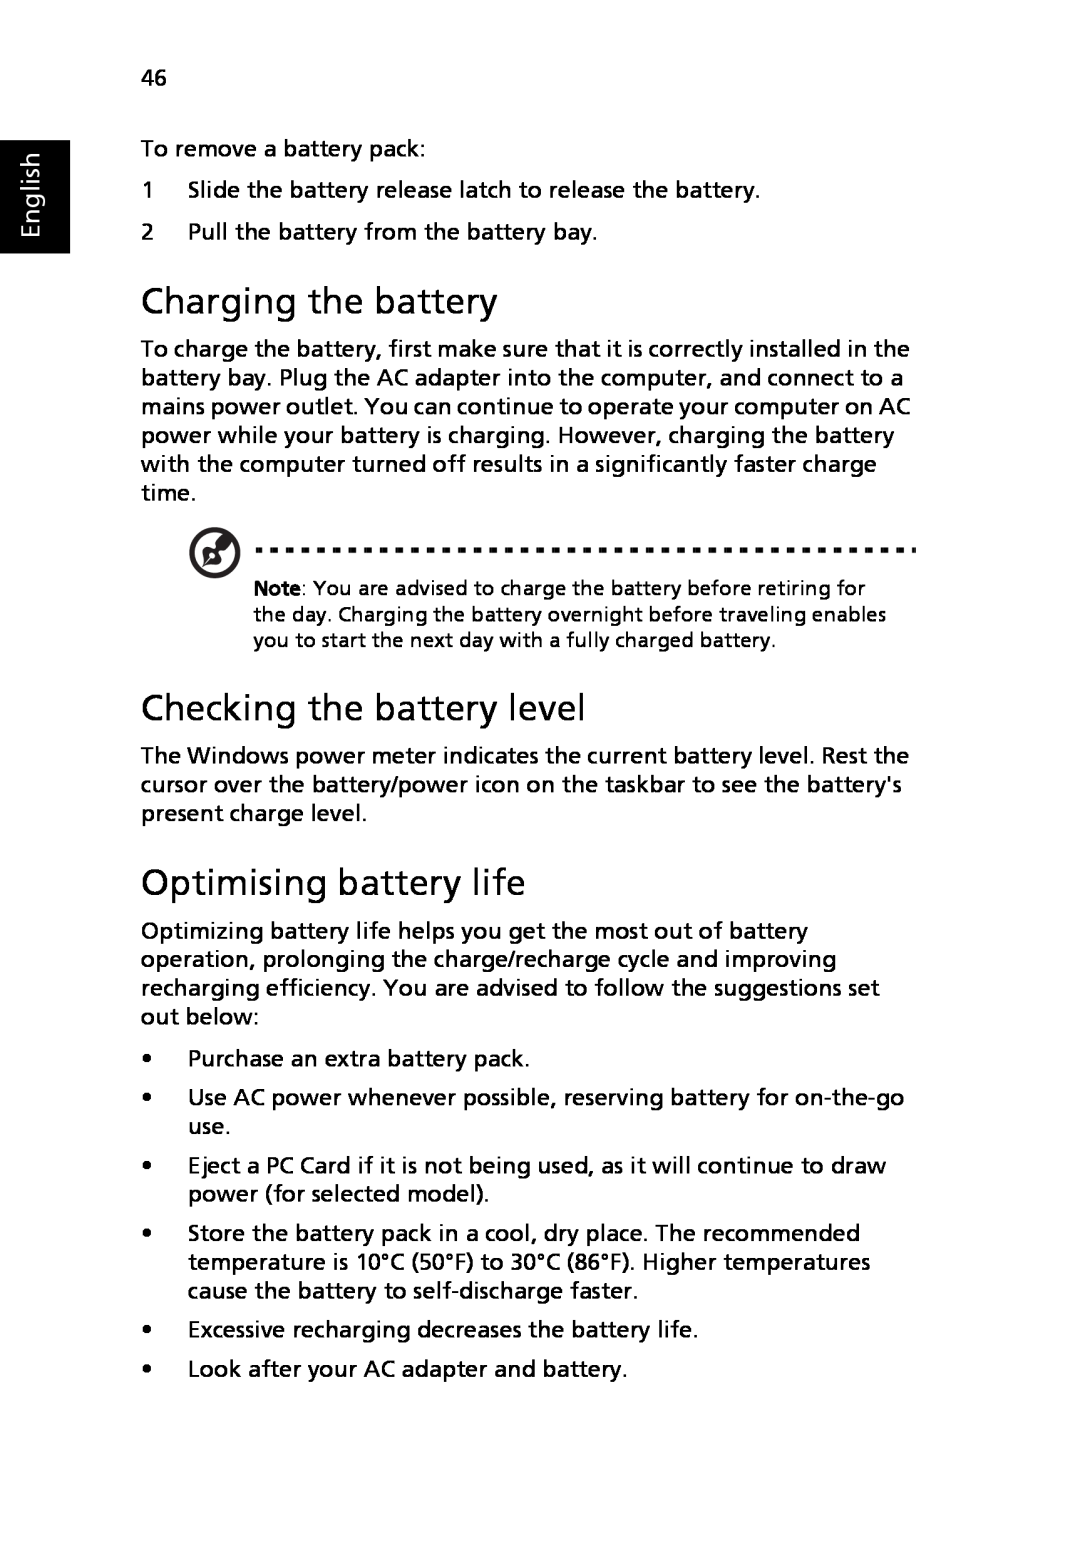 Acer 5520G, 5220 manual Charging the battery, Checking the battery level, Optimising battery life, English 